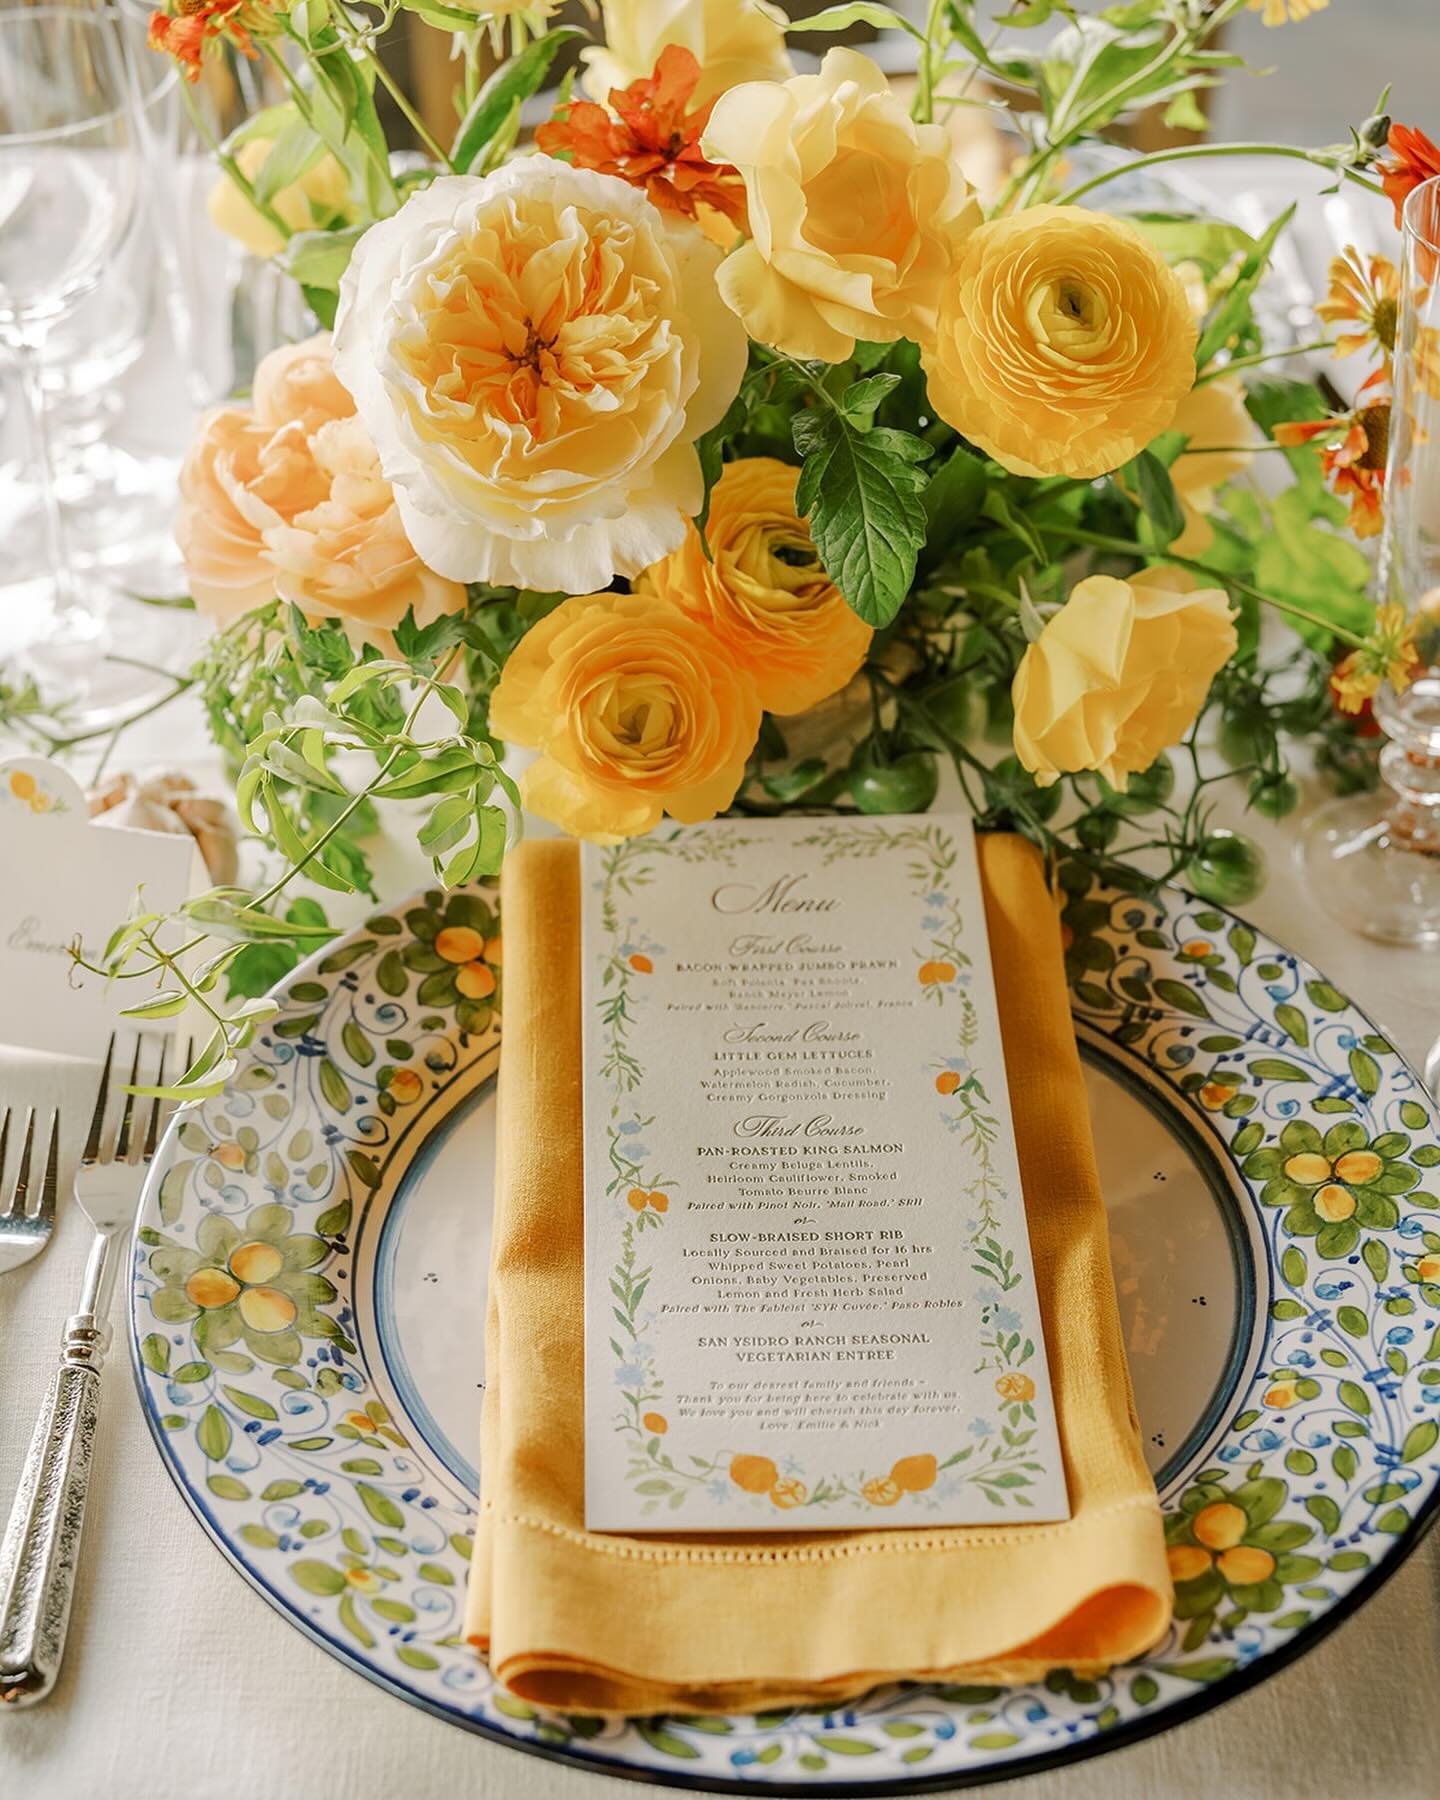 Leaning into the citrus trees that grace the beautiful San Ysidro Ranch in Santa Barbara, California, these letterpresses menus, table numbers and place cards are perfectly paired with the location for this gorgeous wedding reception.
.
Wedding Plann